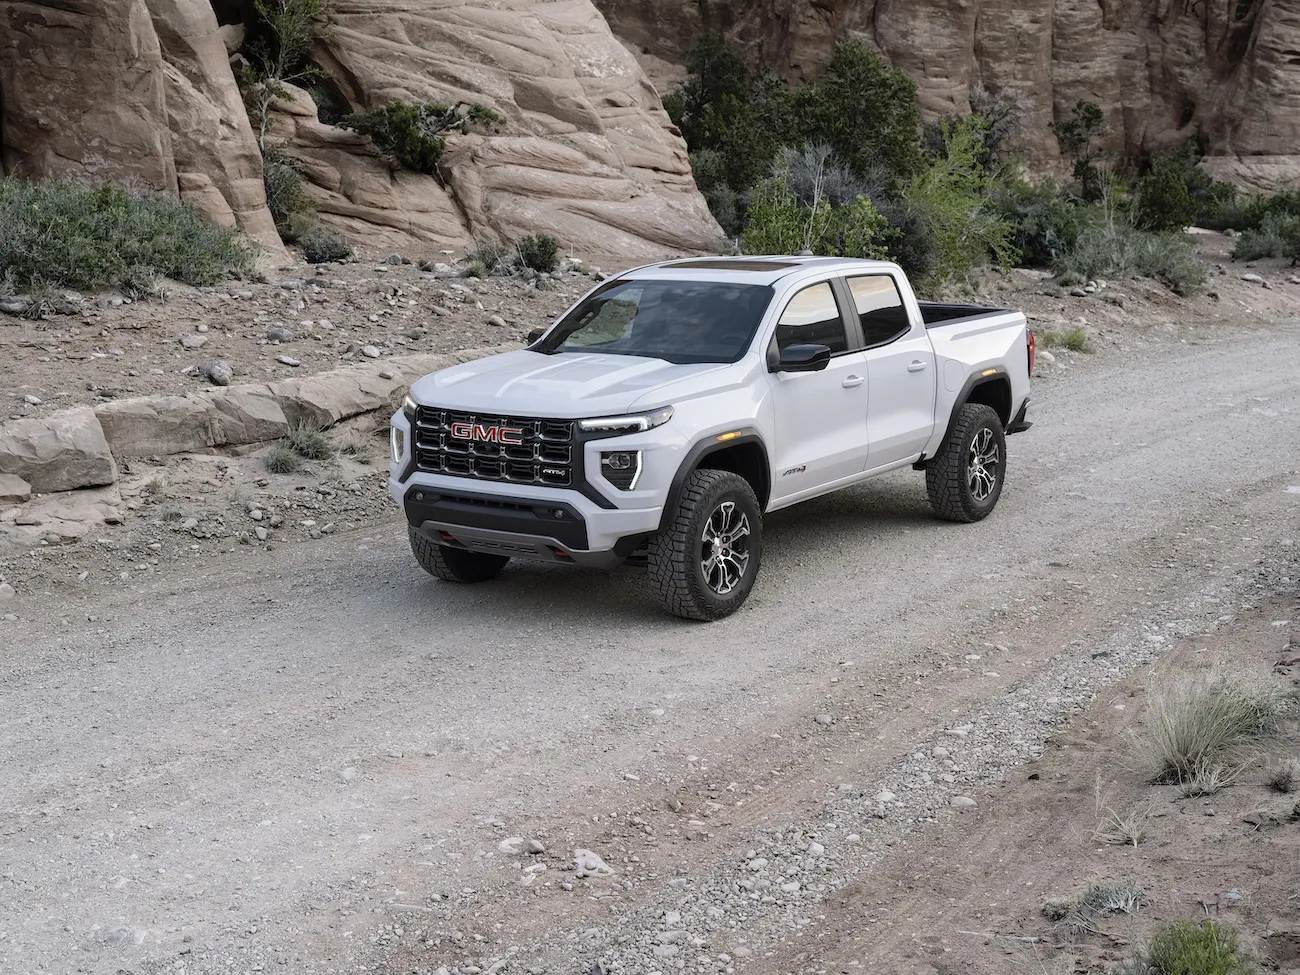 2024 GMC Canyon, VW Golf top this week’s new car reviews